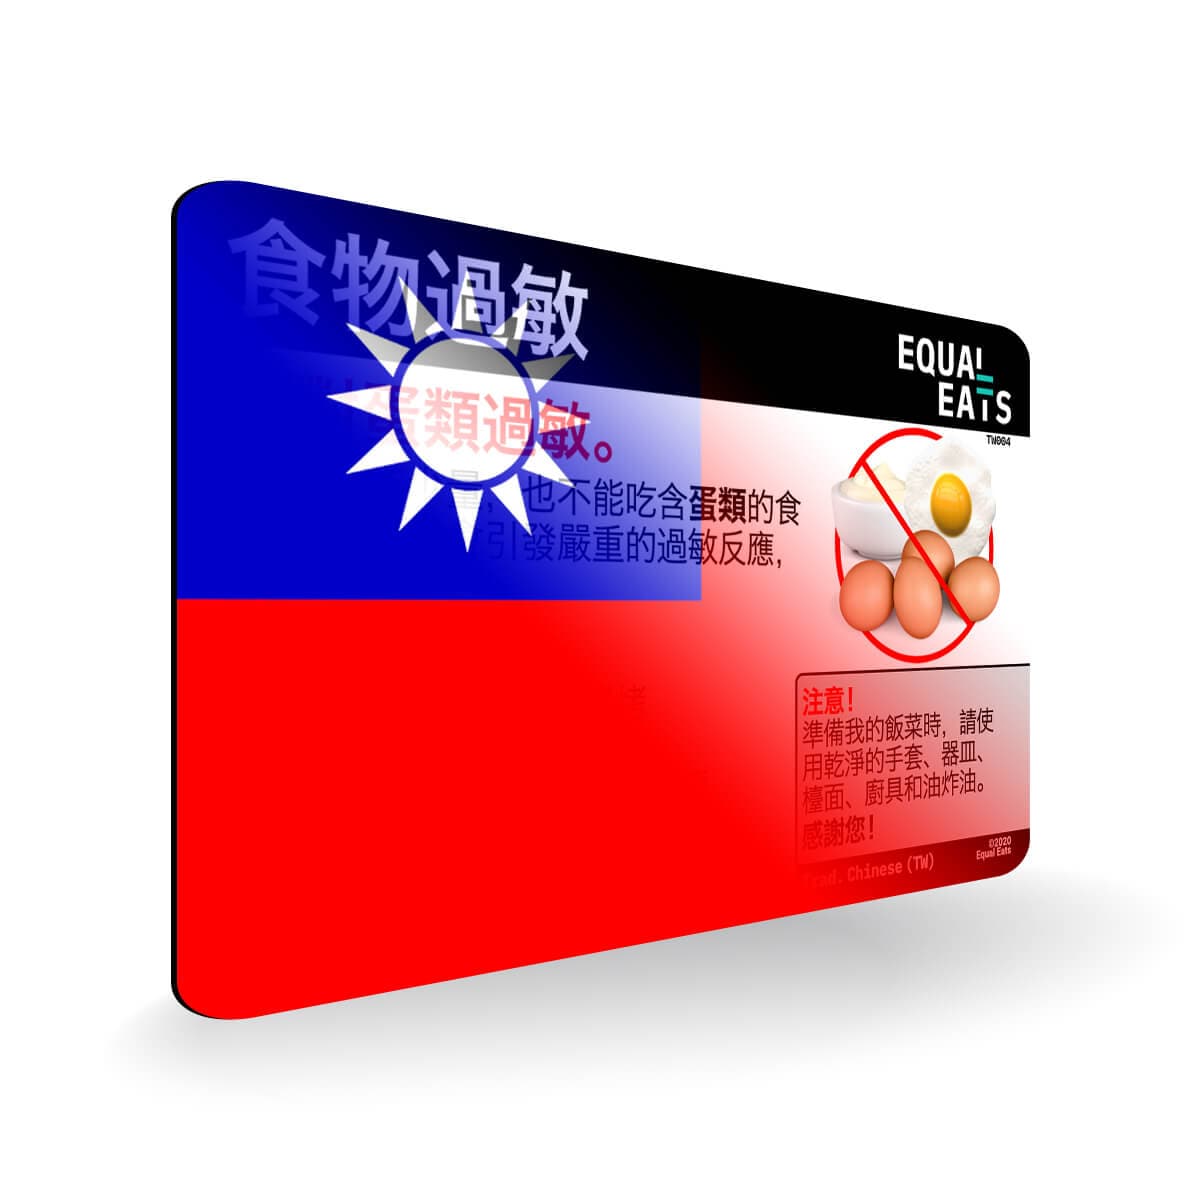 Egg Allergy in Traditional Chinese. Egg Allergy Card for Taiwan